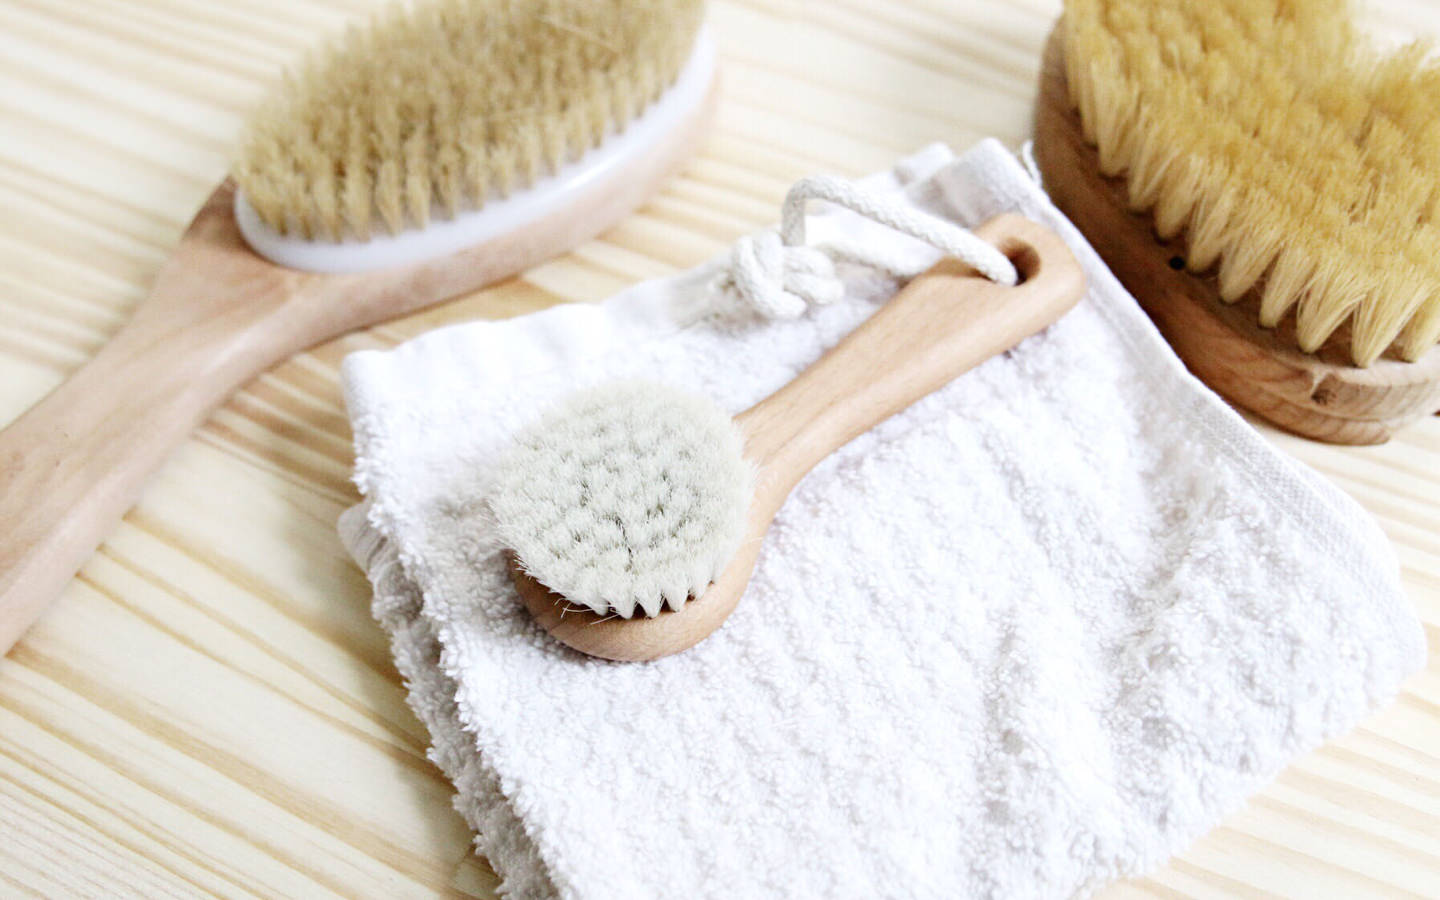 How to Dry Brush: a Guide to Everything You Need to Know